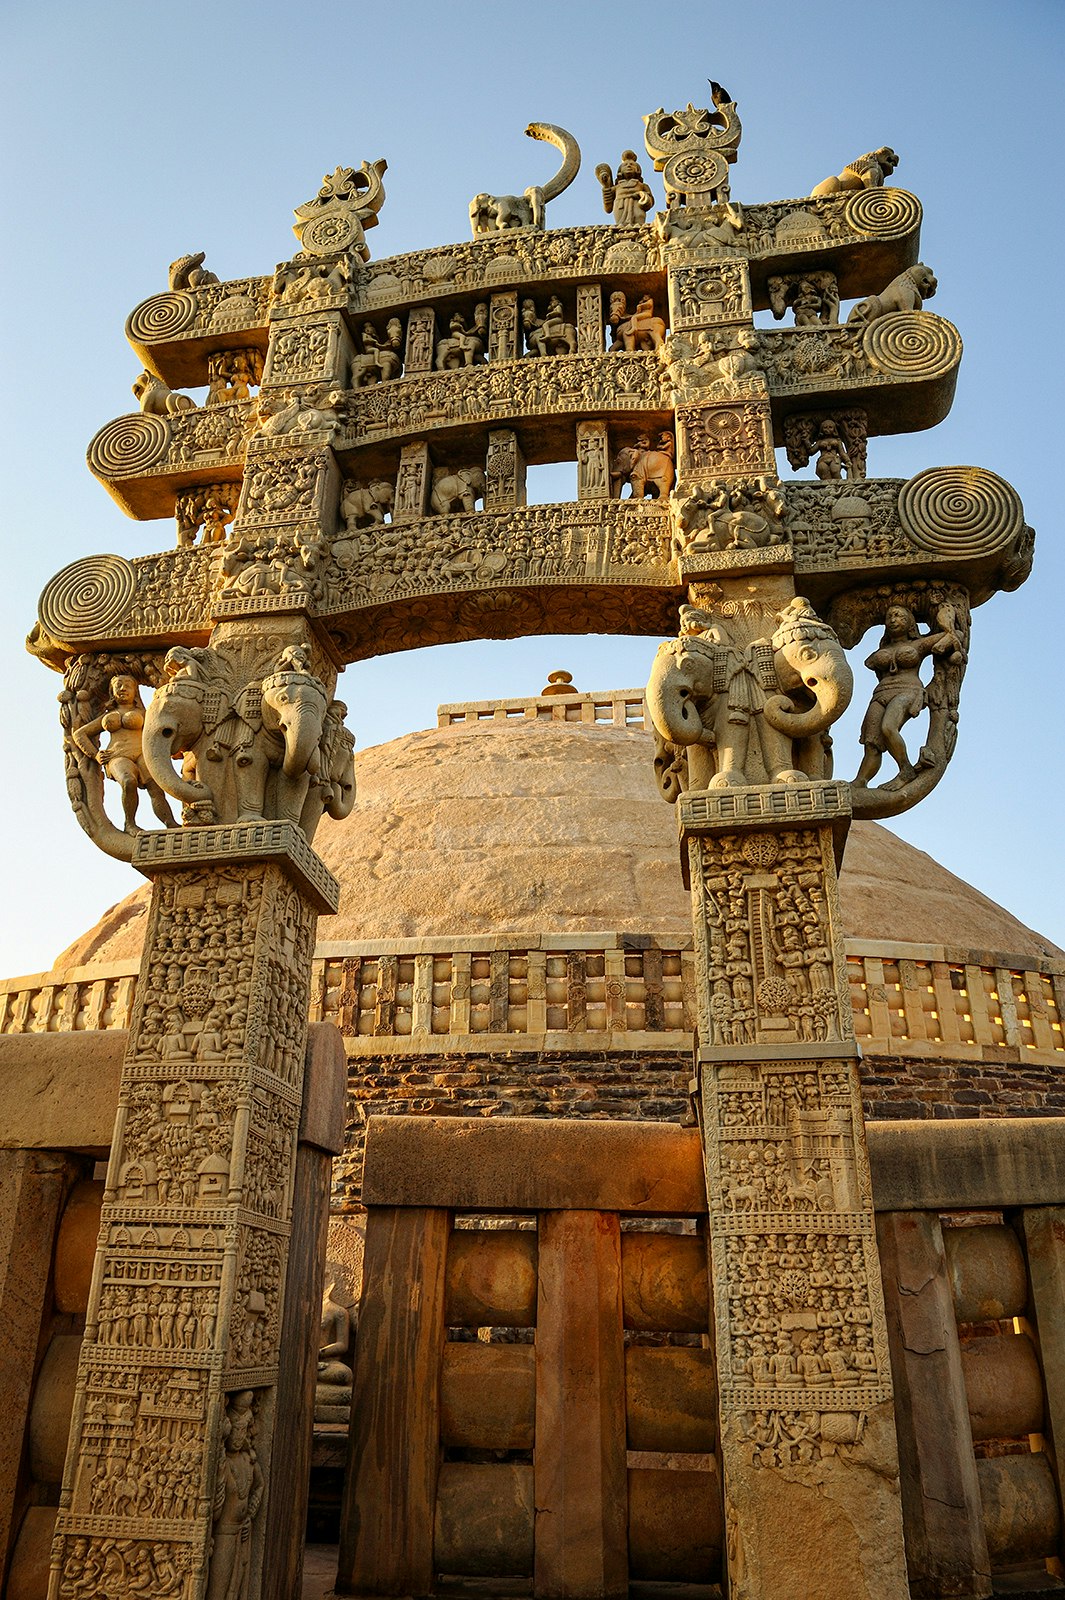 An intricately carved gate sits in front of the rounded Great Stupa in Sanchi, India.